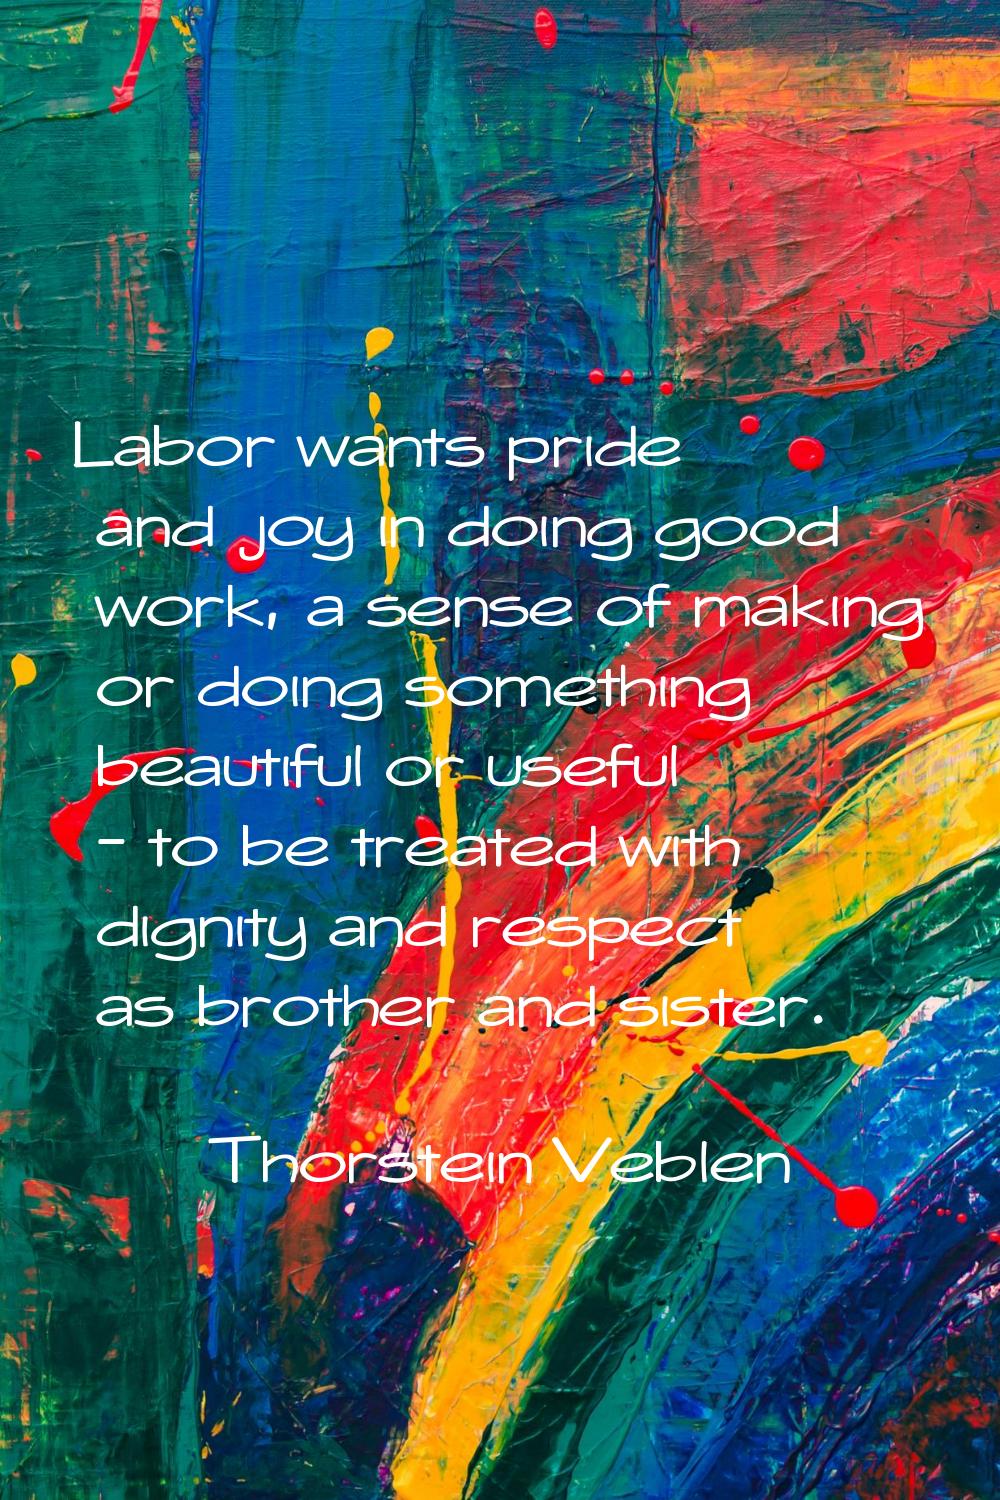 Labor wants pride and joy in doing good work, a sense of making or doing something beautiful or use